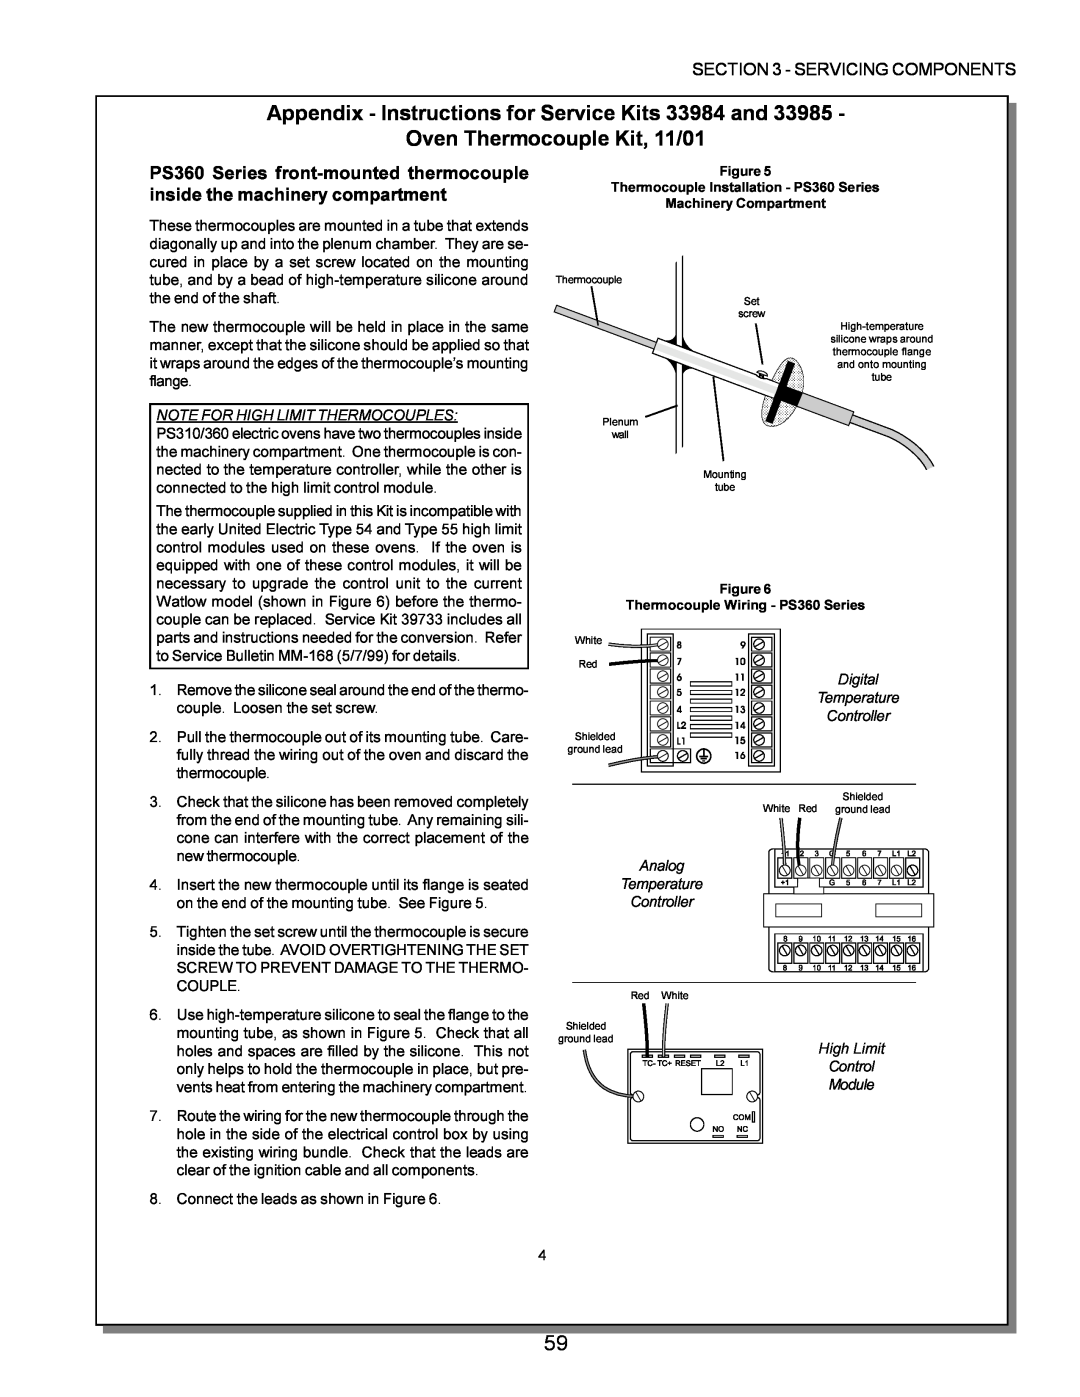 Middleby Marshall PS570, PS360, PS200 manual Appendix - Instructions for Service Kits 33984 and, Oven Thermocouple Kit, 11/01 